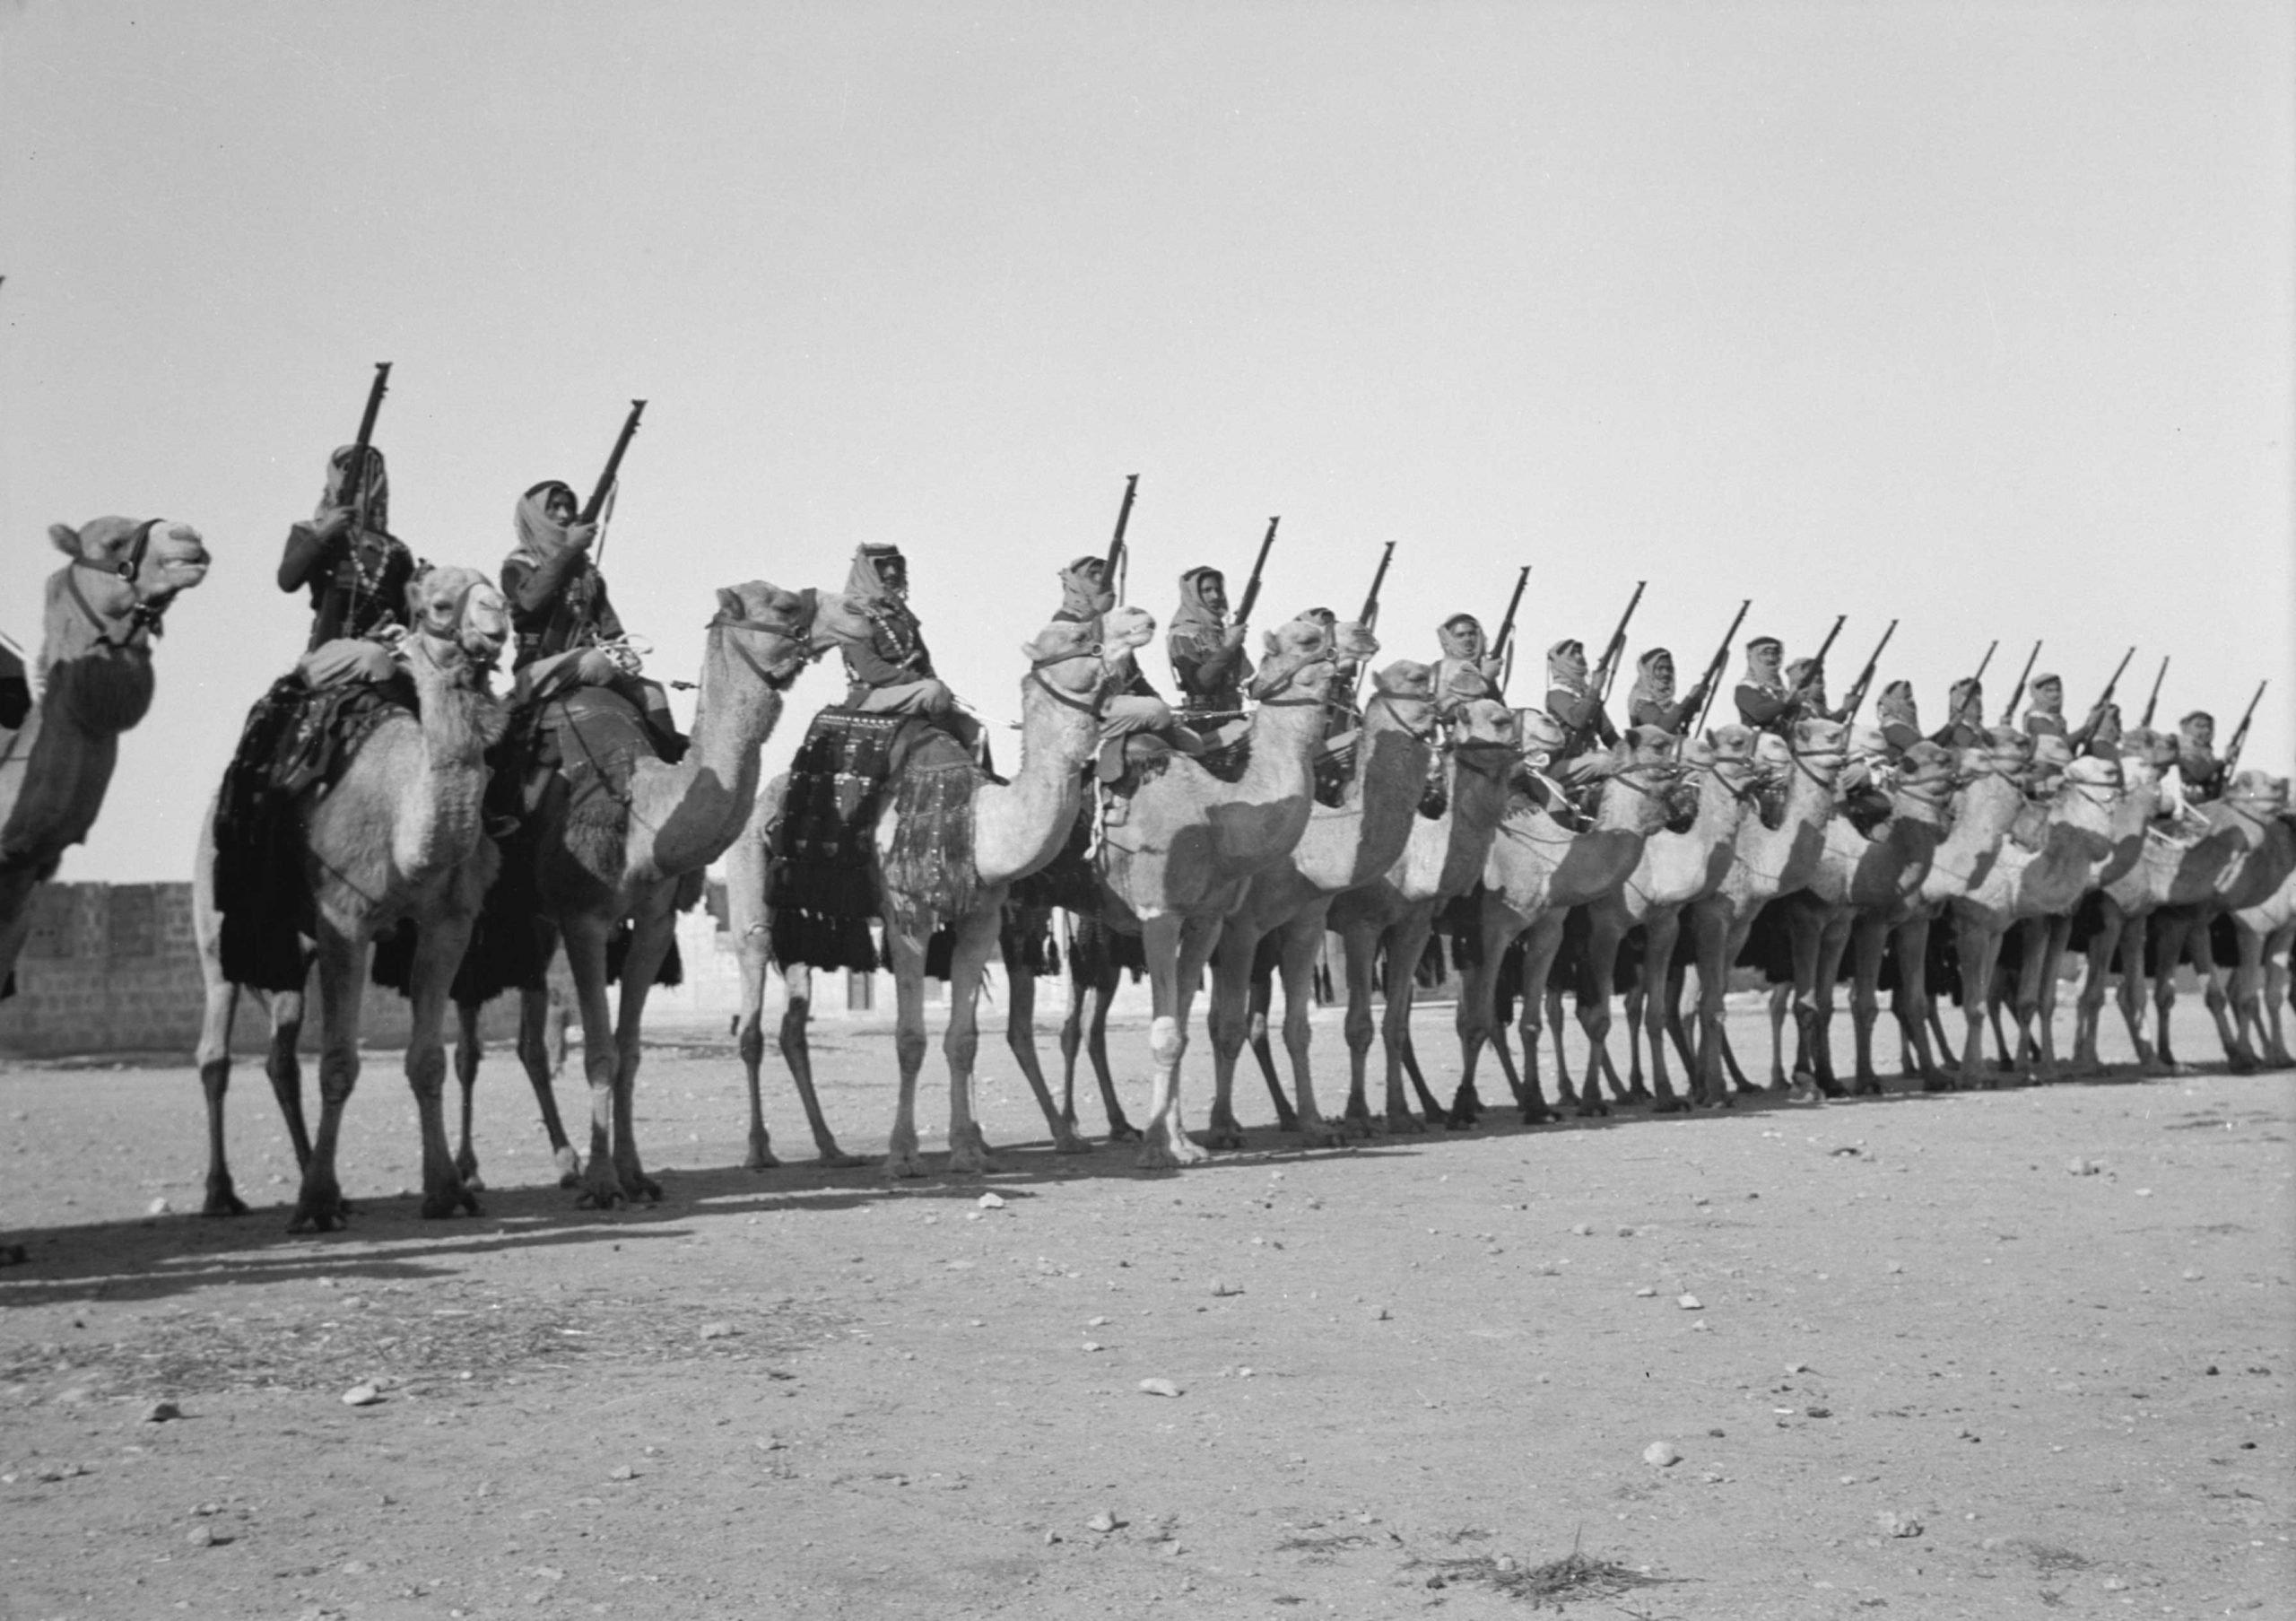 Arab soldiers from the British army